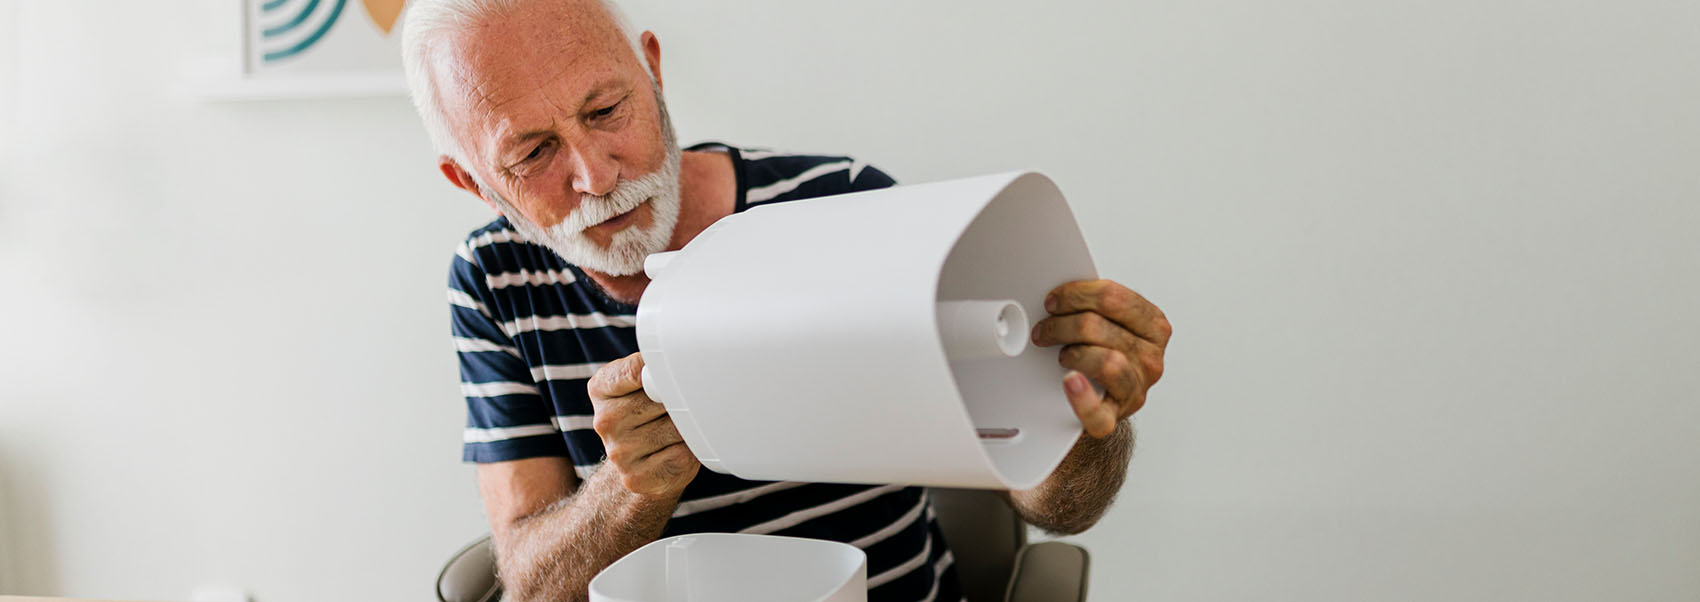 man in a new home assembles his humidifier